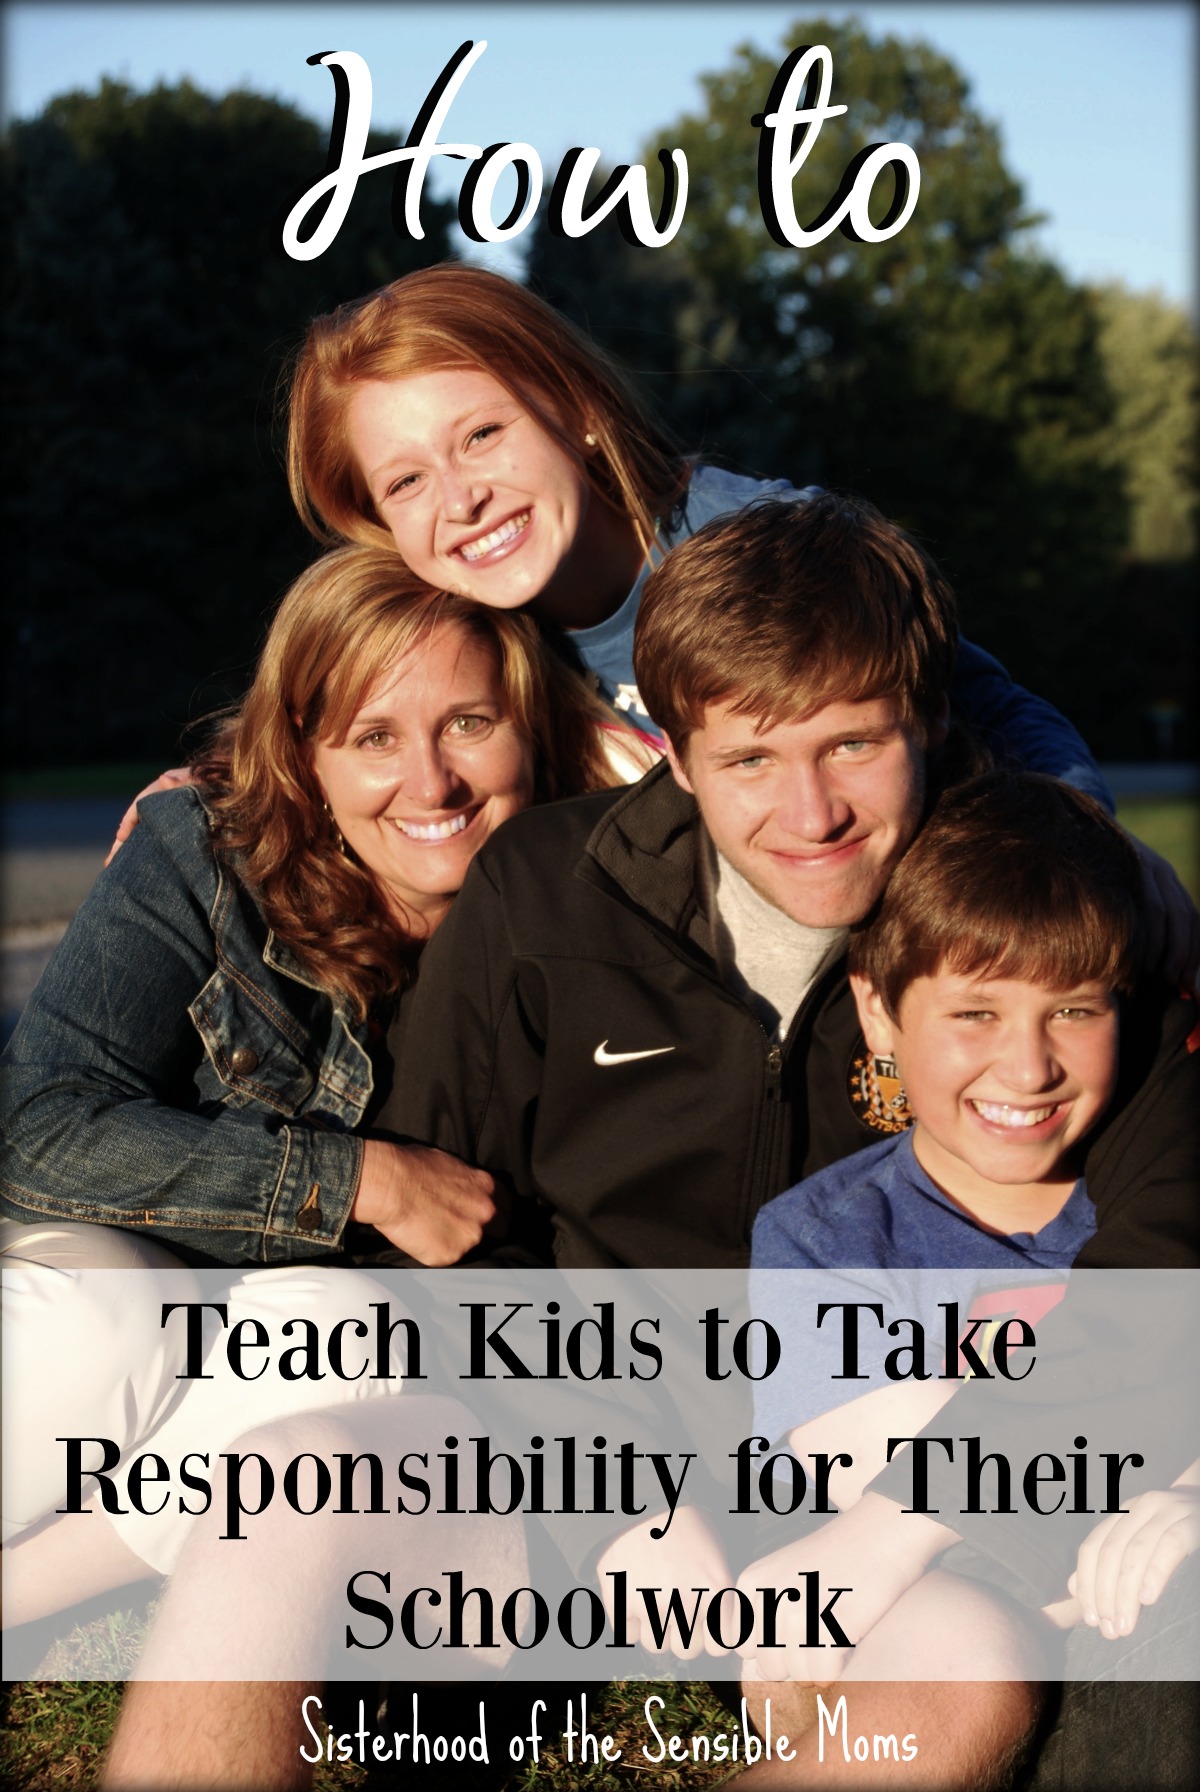 Practical Tips for How to Teach Kids to Take Responsibility for Their Schoolwork. Before you stop hovering, you must teach them the skills to be self-sufficient. Think of it as giving them training wheels for responsibility. | Parenting | Sisterhood of the Sensible Moms